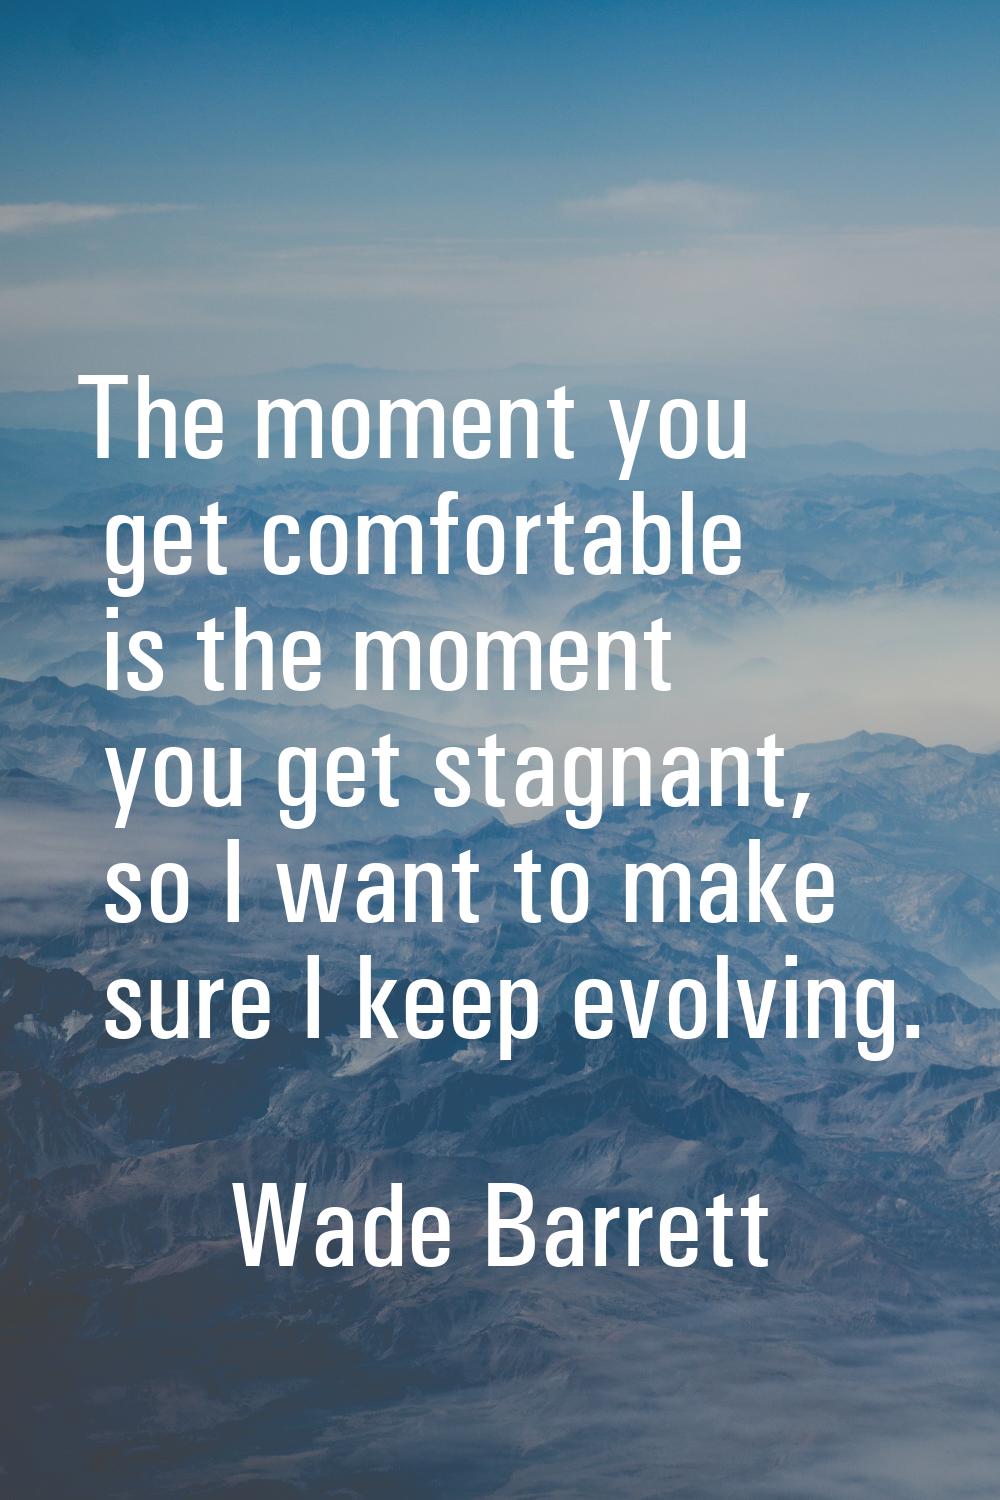 The moment you get comfortable is the moment you get stagnant, so I want to make sure I keep evolvi